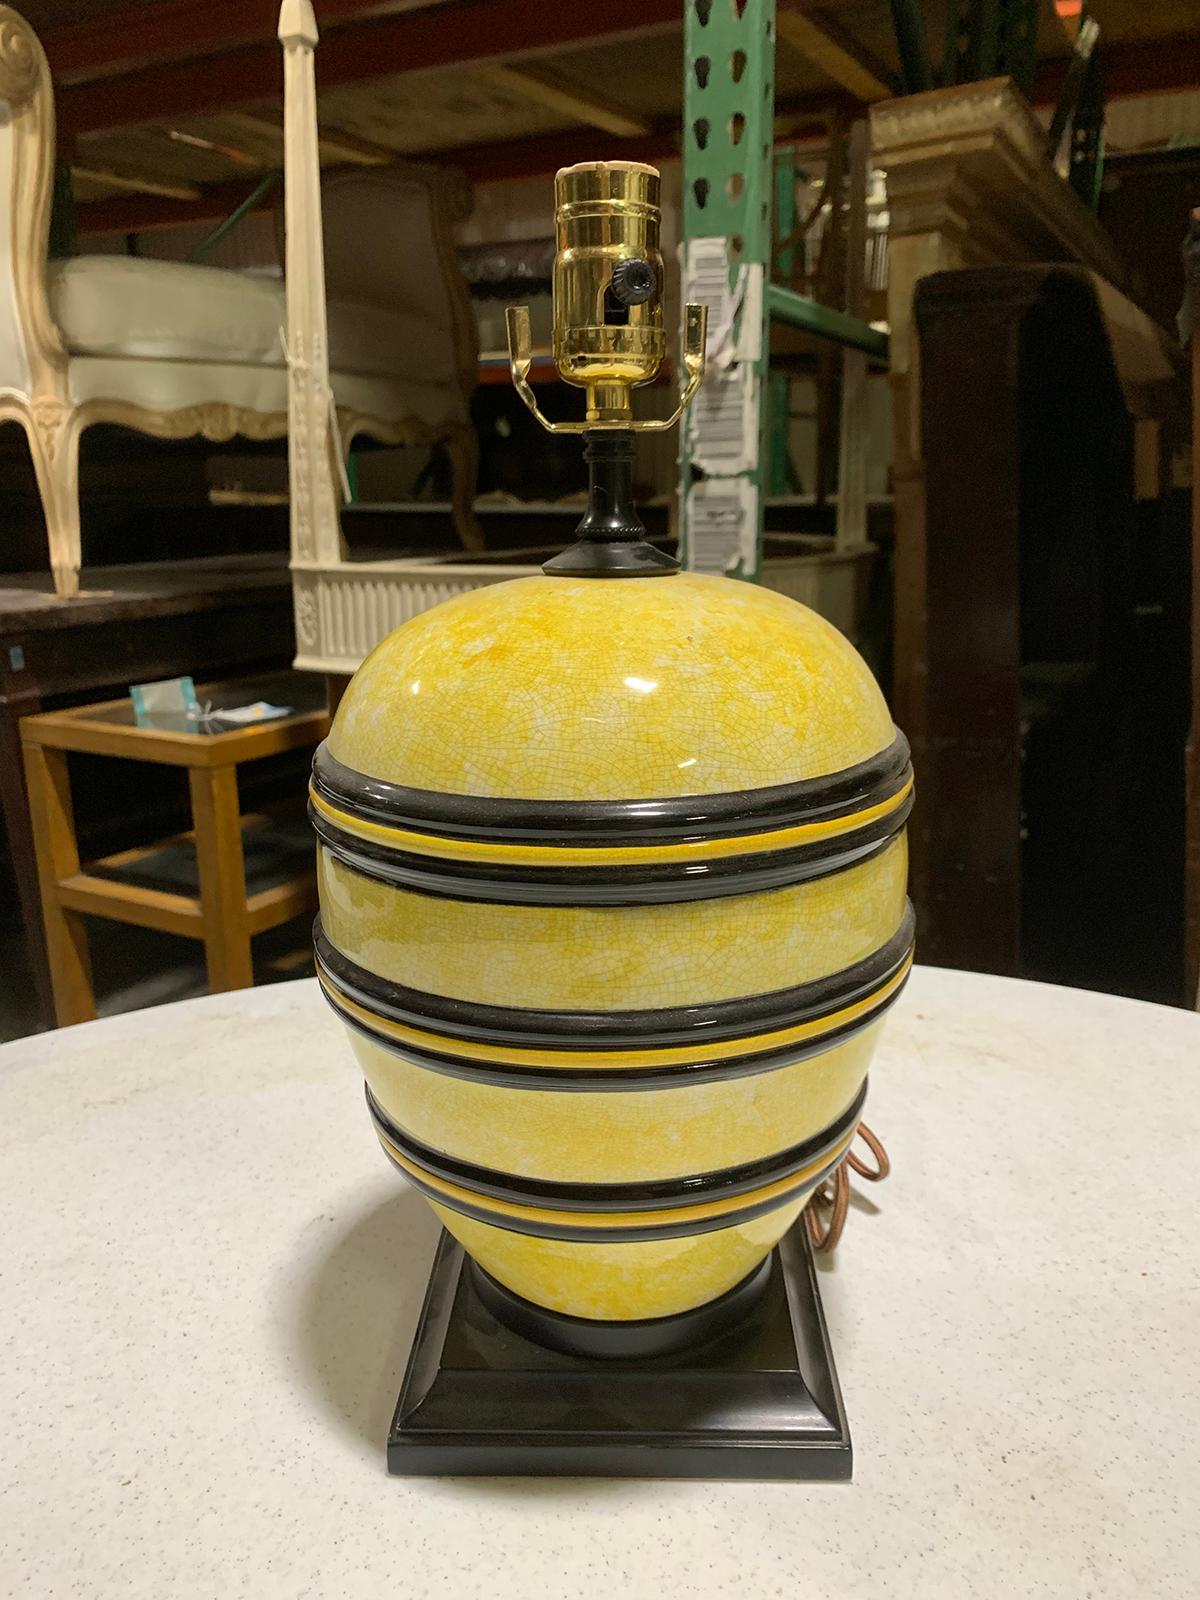 Mid-20th century black and yellow pottery lamp on custom base
New wiring.